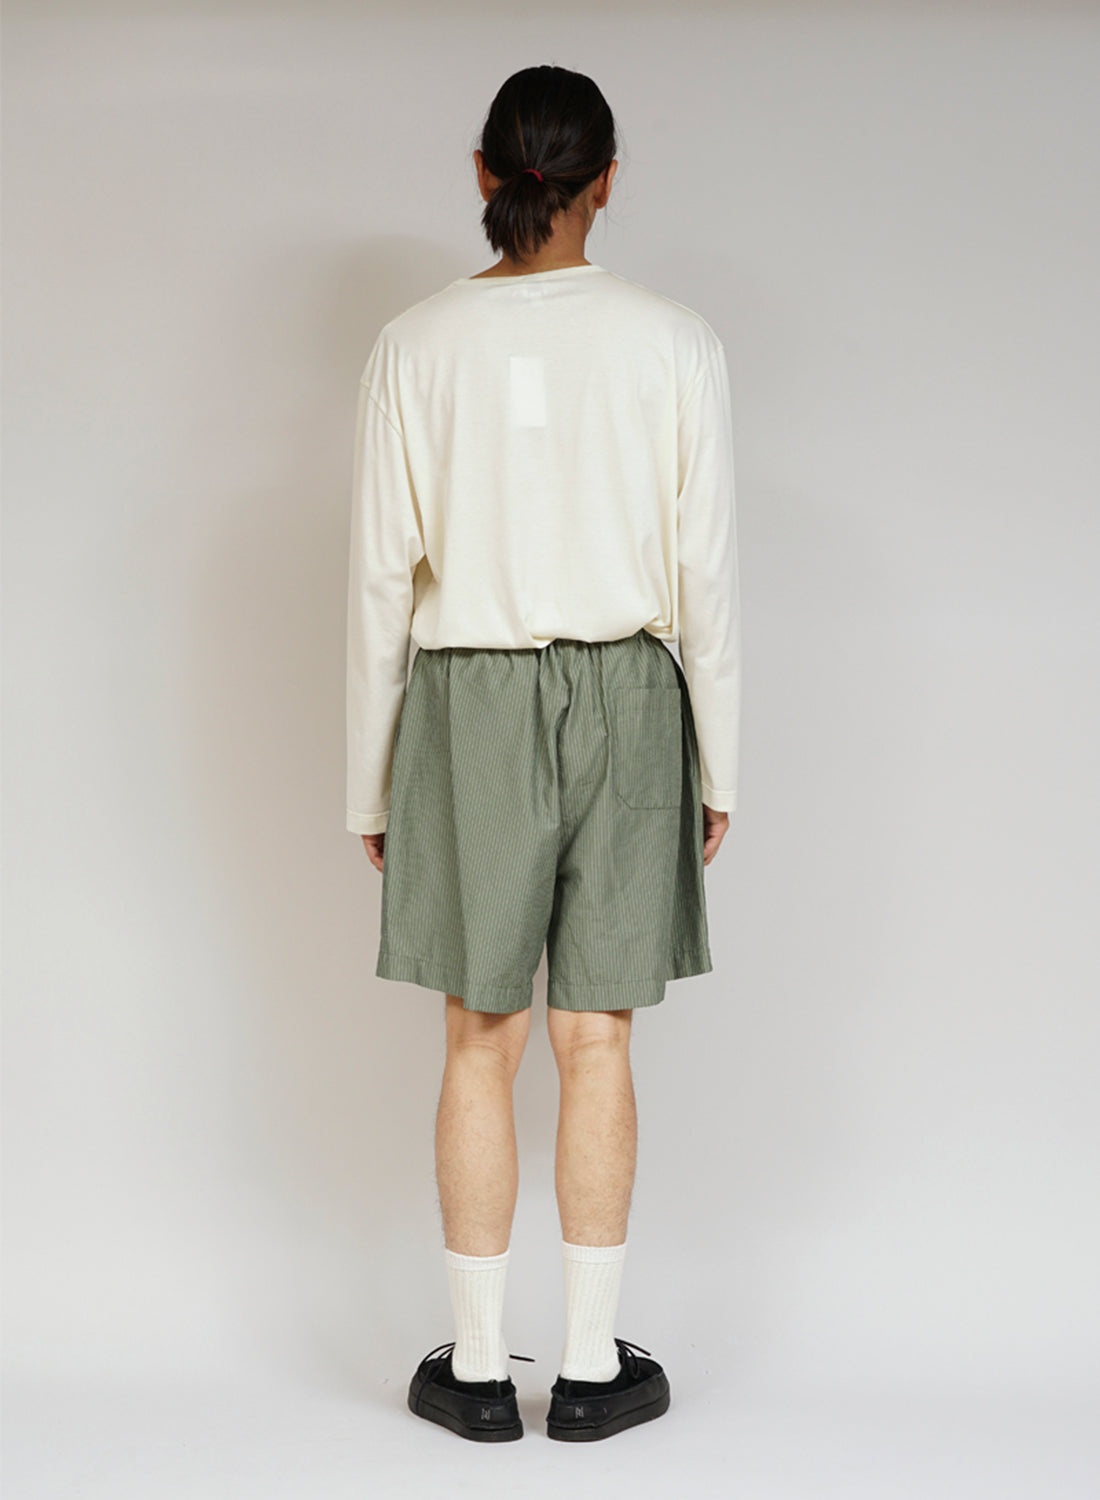 Nigel Cabourn x Sunspel Ripstop Army Short in Army Green - 4